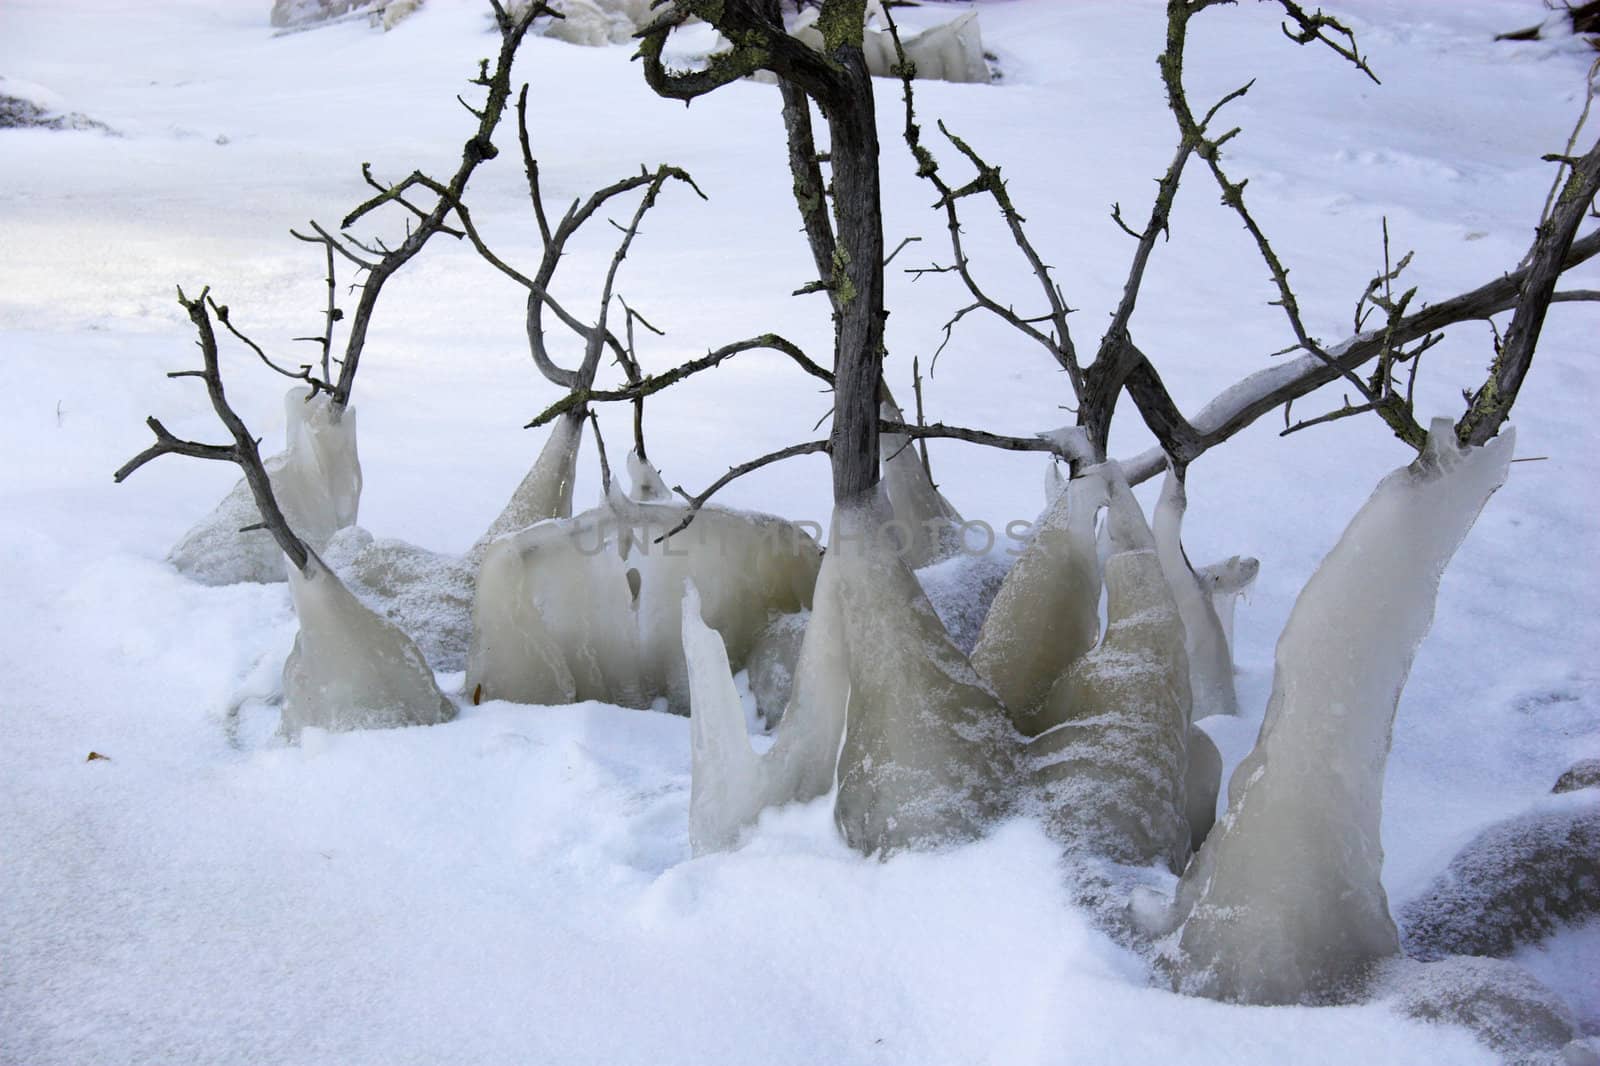 Brunches of the young trees iced up near the lake in winter